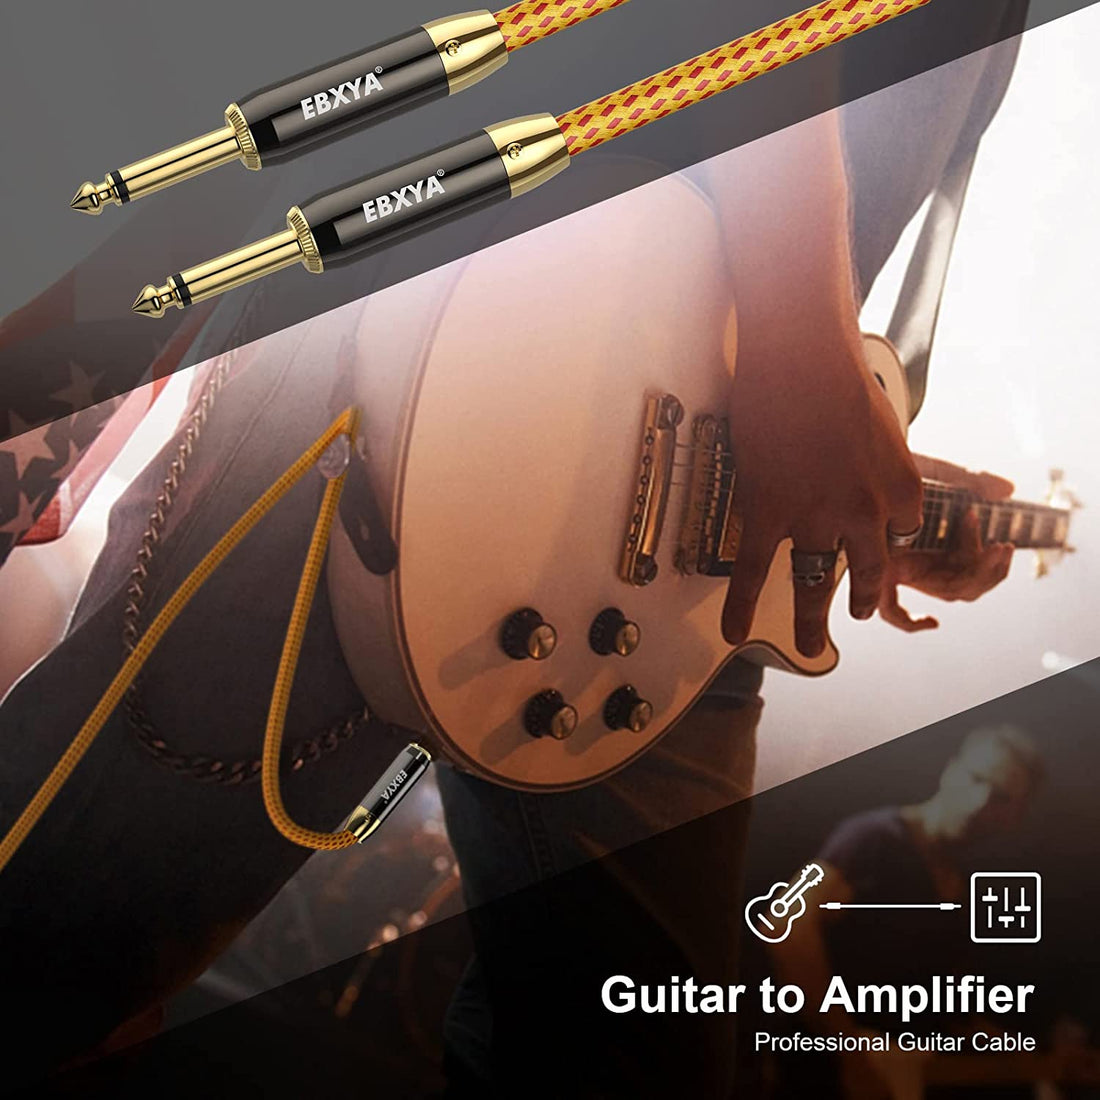 General knowledge about electric guitar connection cable